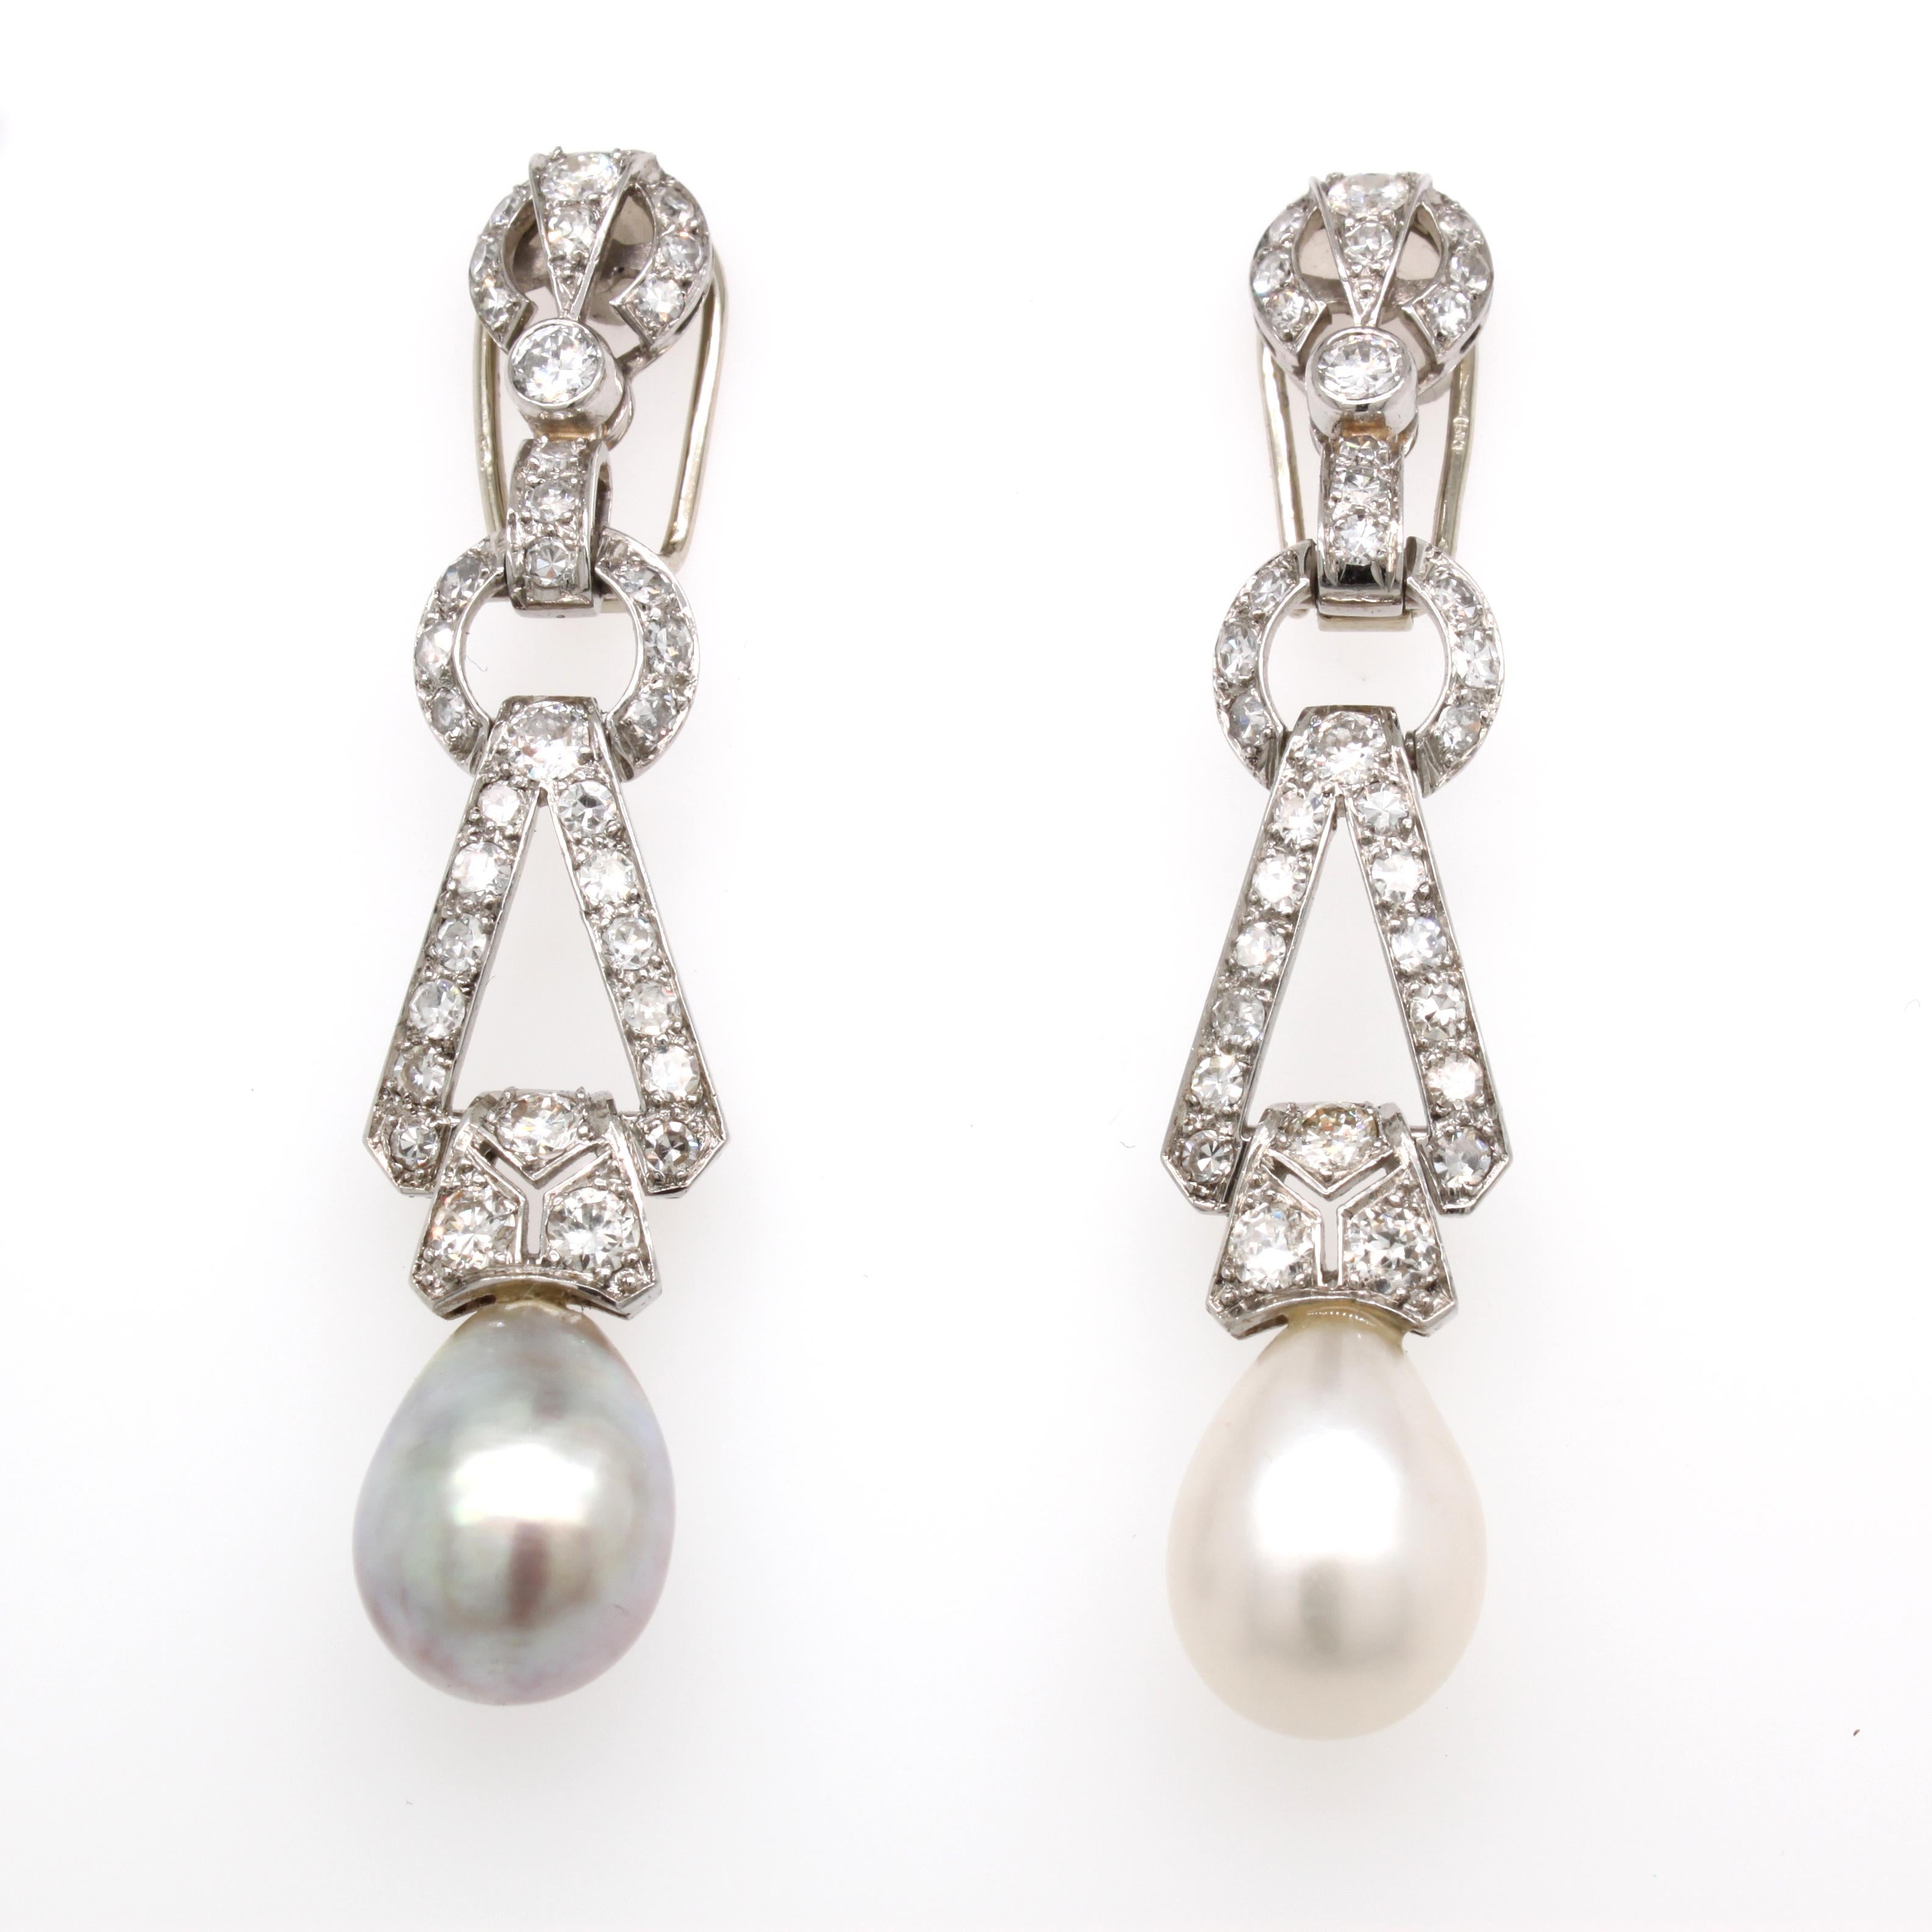 Art Deco Natural Saltwater Pearl and Diamond Earrings, ca. 1920s

A beautiful and very elegant pair of grey and white natural pearl and diamond earrings from the Art Deco period. The two natural saltwater pearl drops are of the finest quality